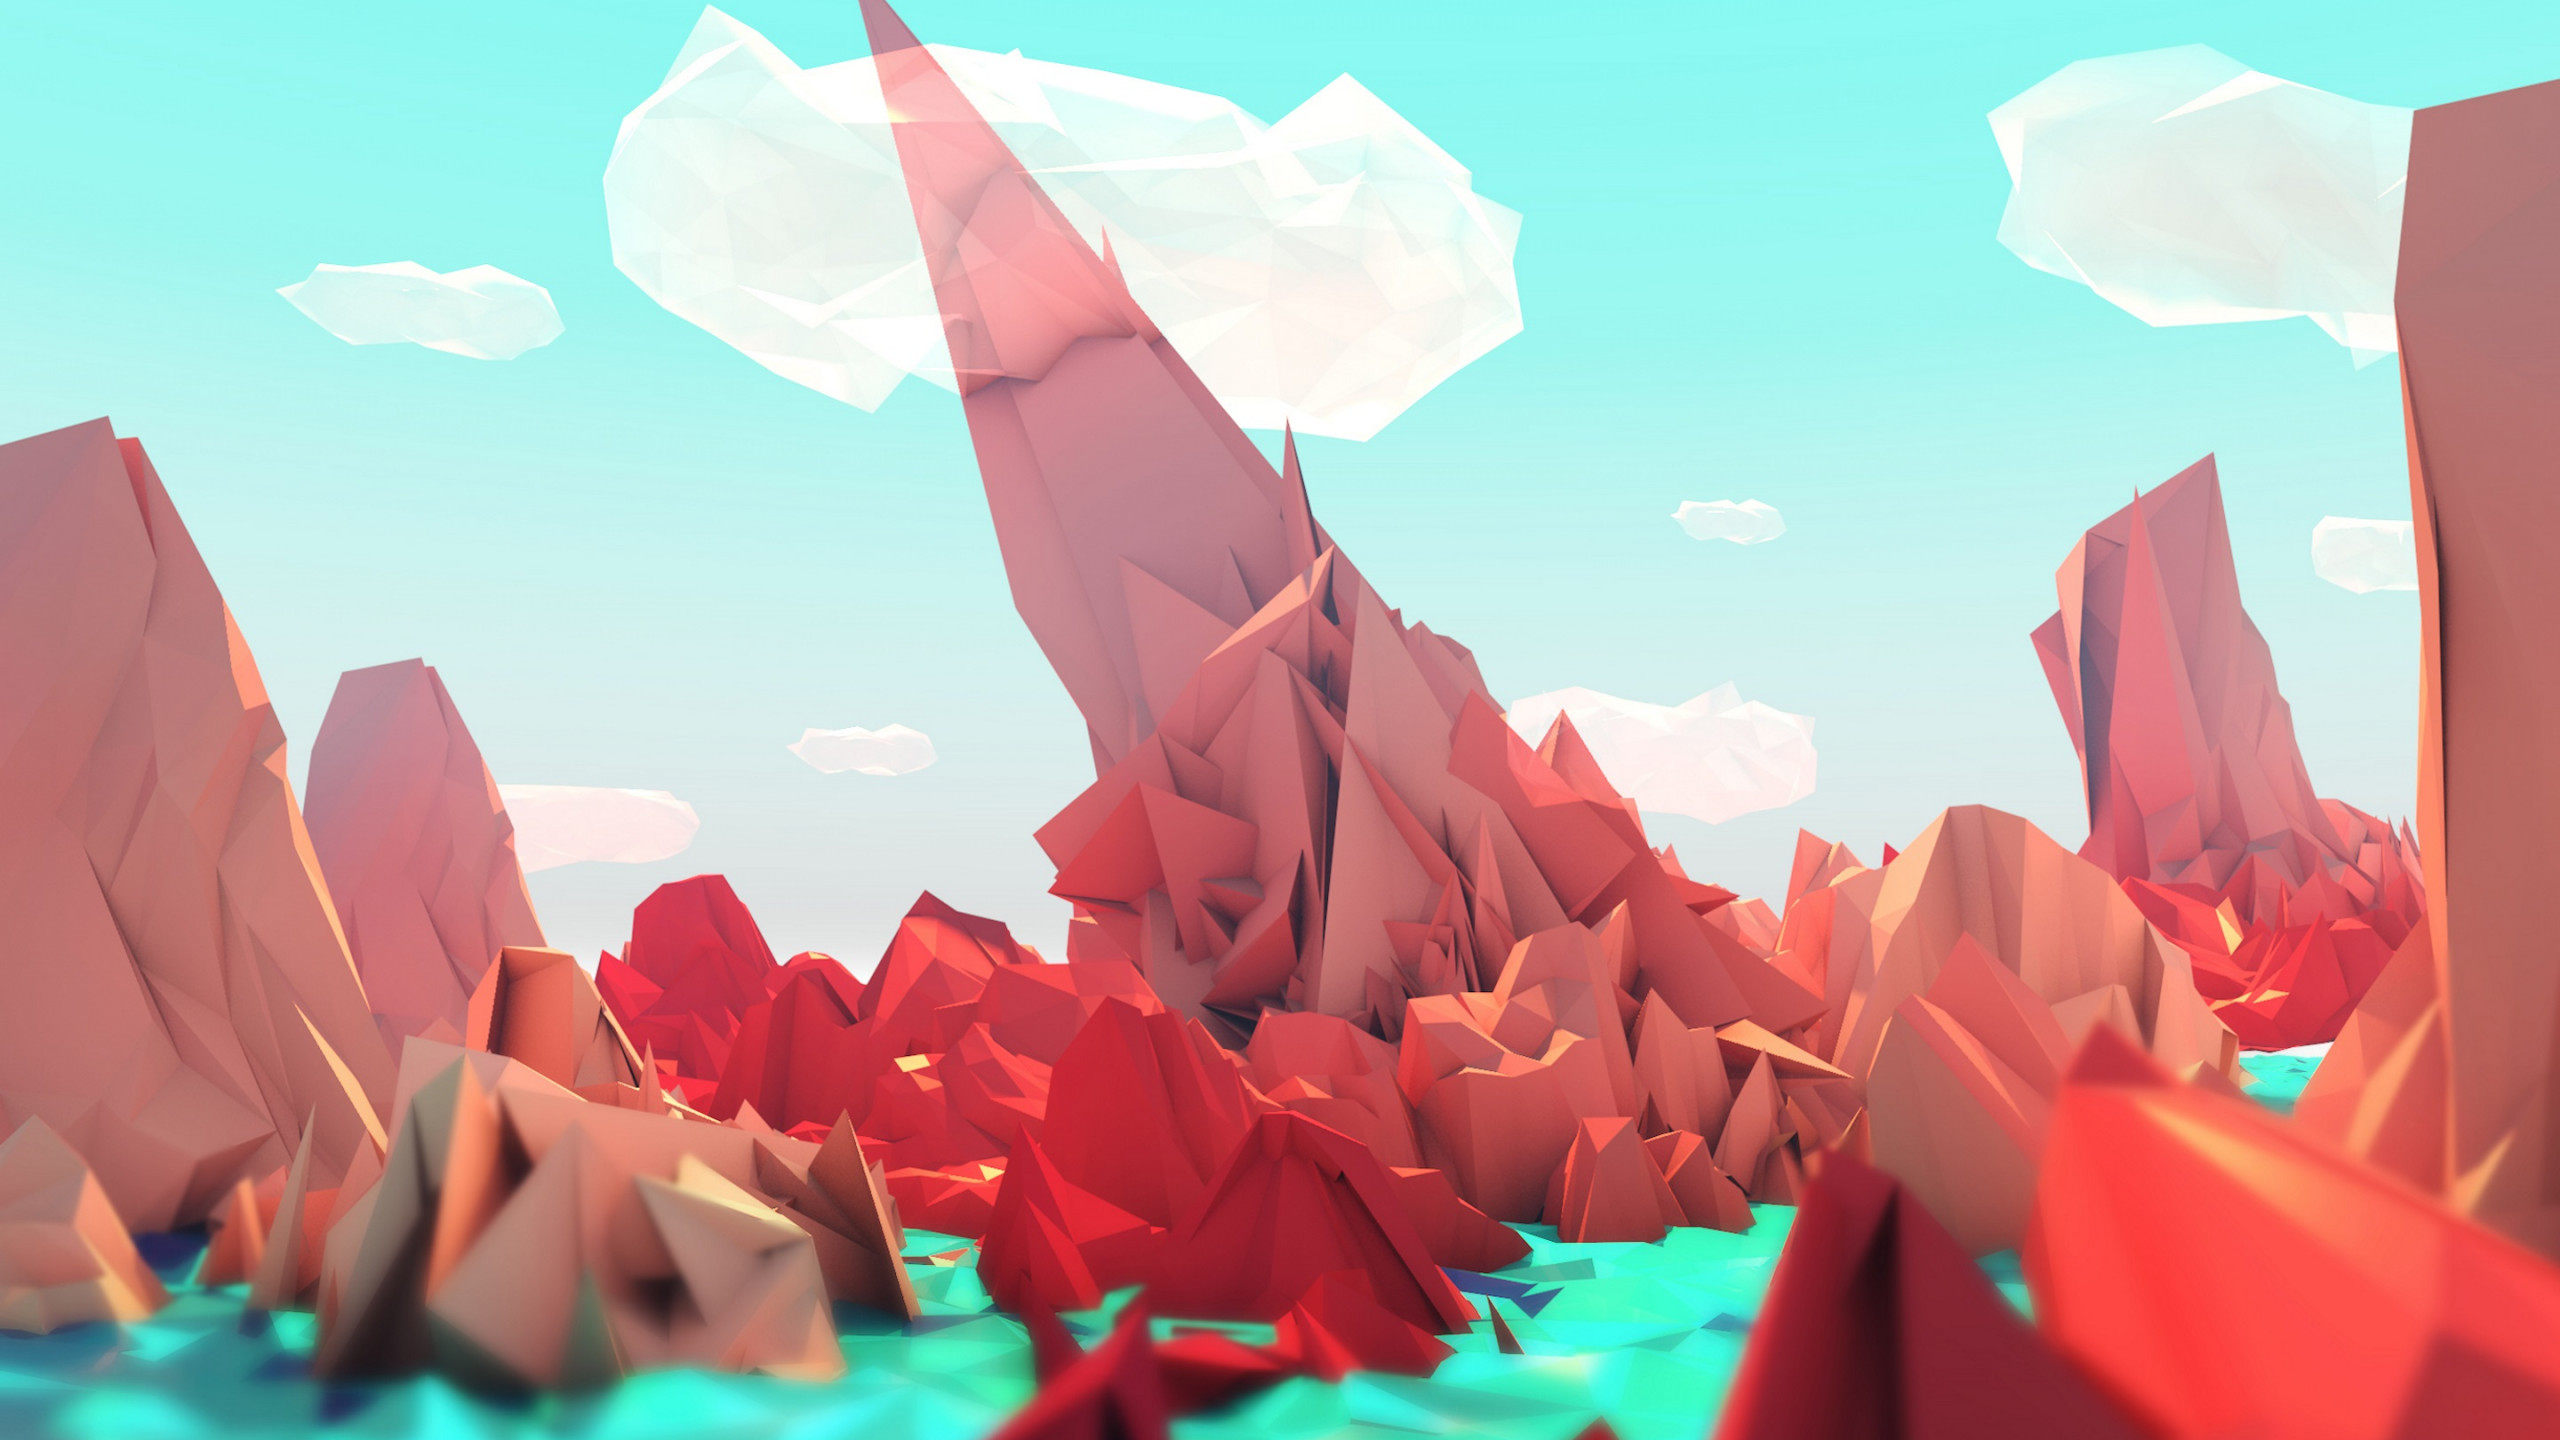 The red mountains. Low poly illustration wallpaper 2560x1440